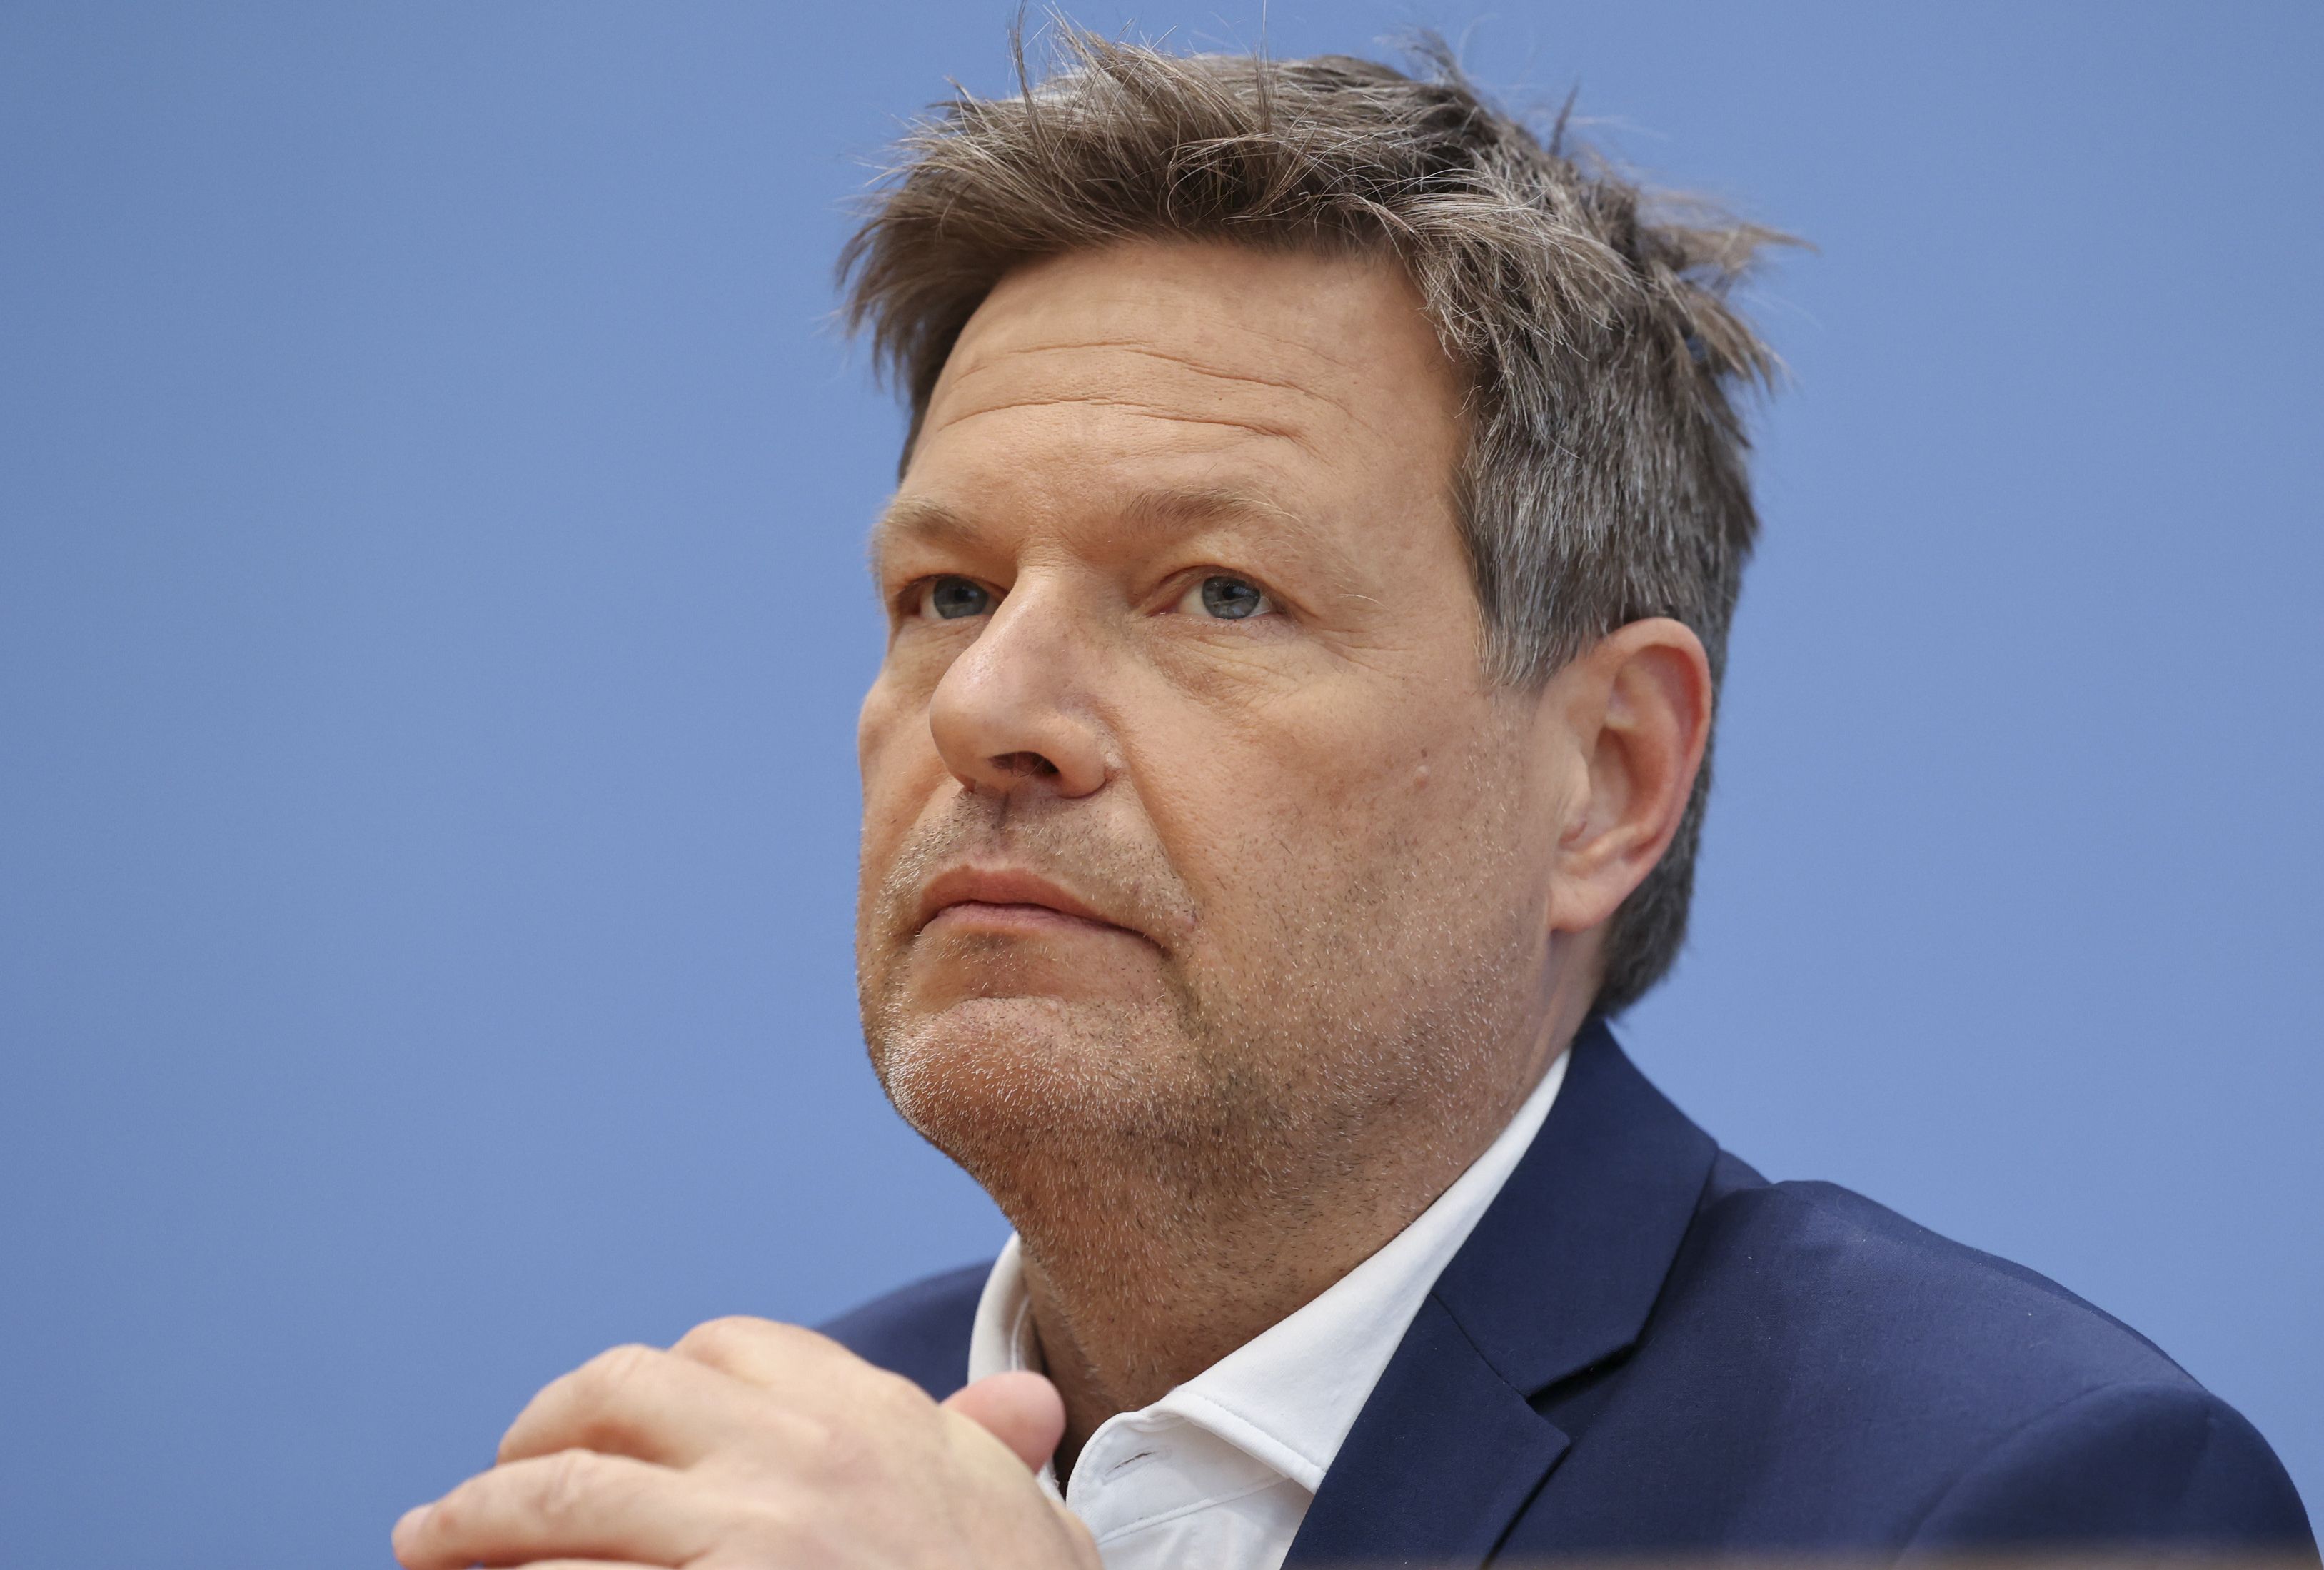 German Economics and Climate Change Minister Habeck addresses news conference